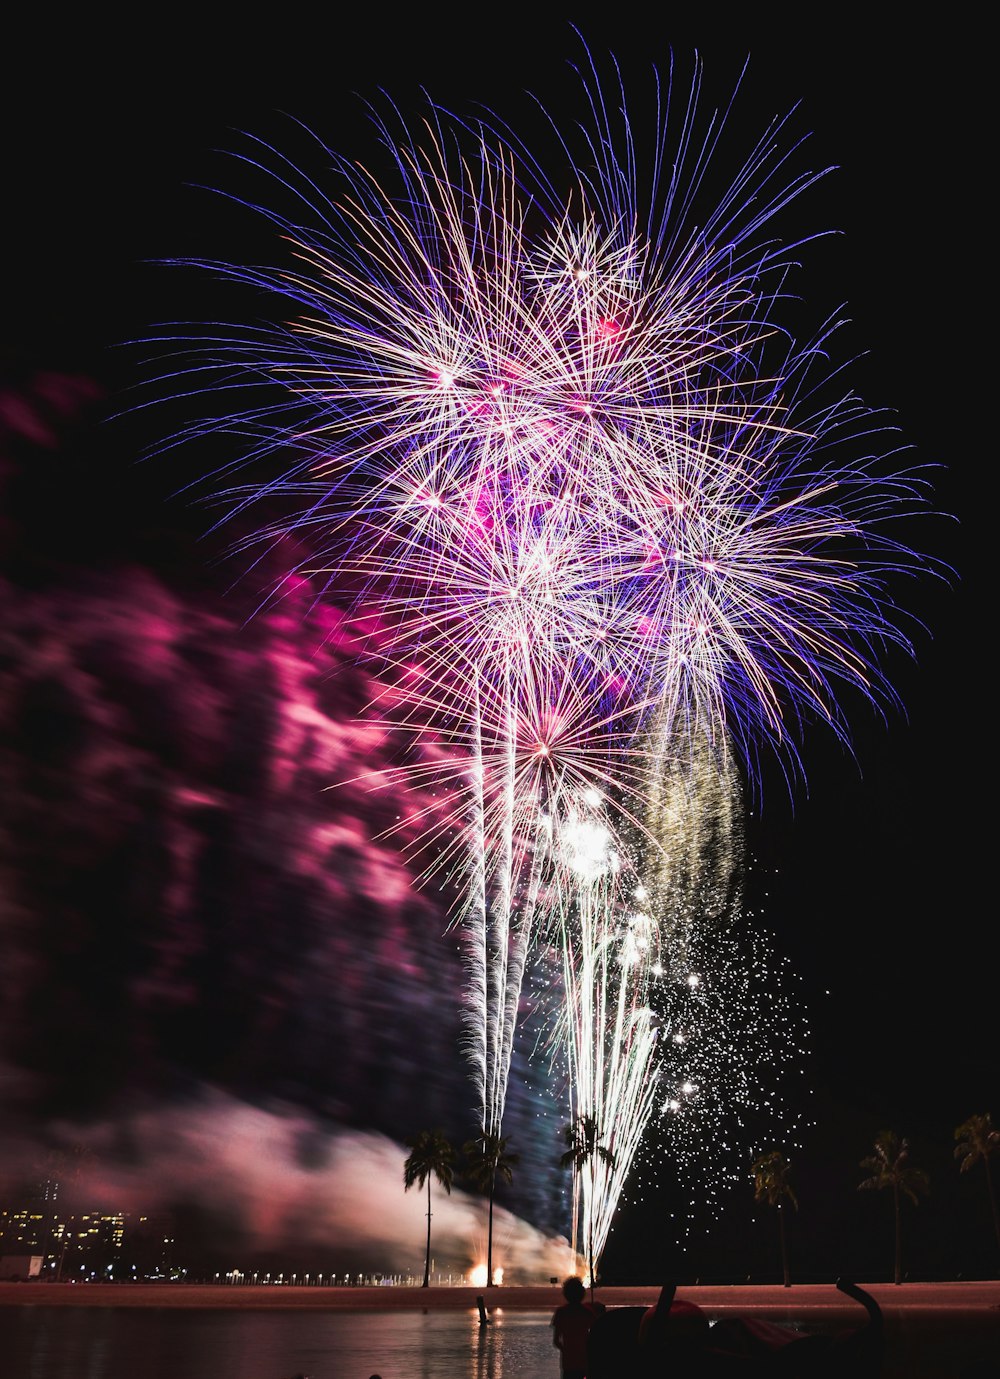 pink and white fireworks display during nighttime